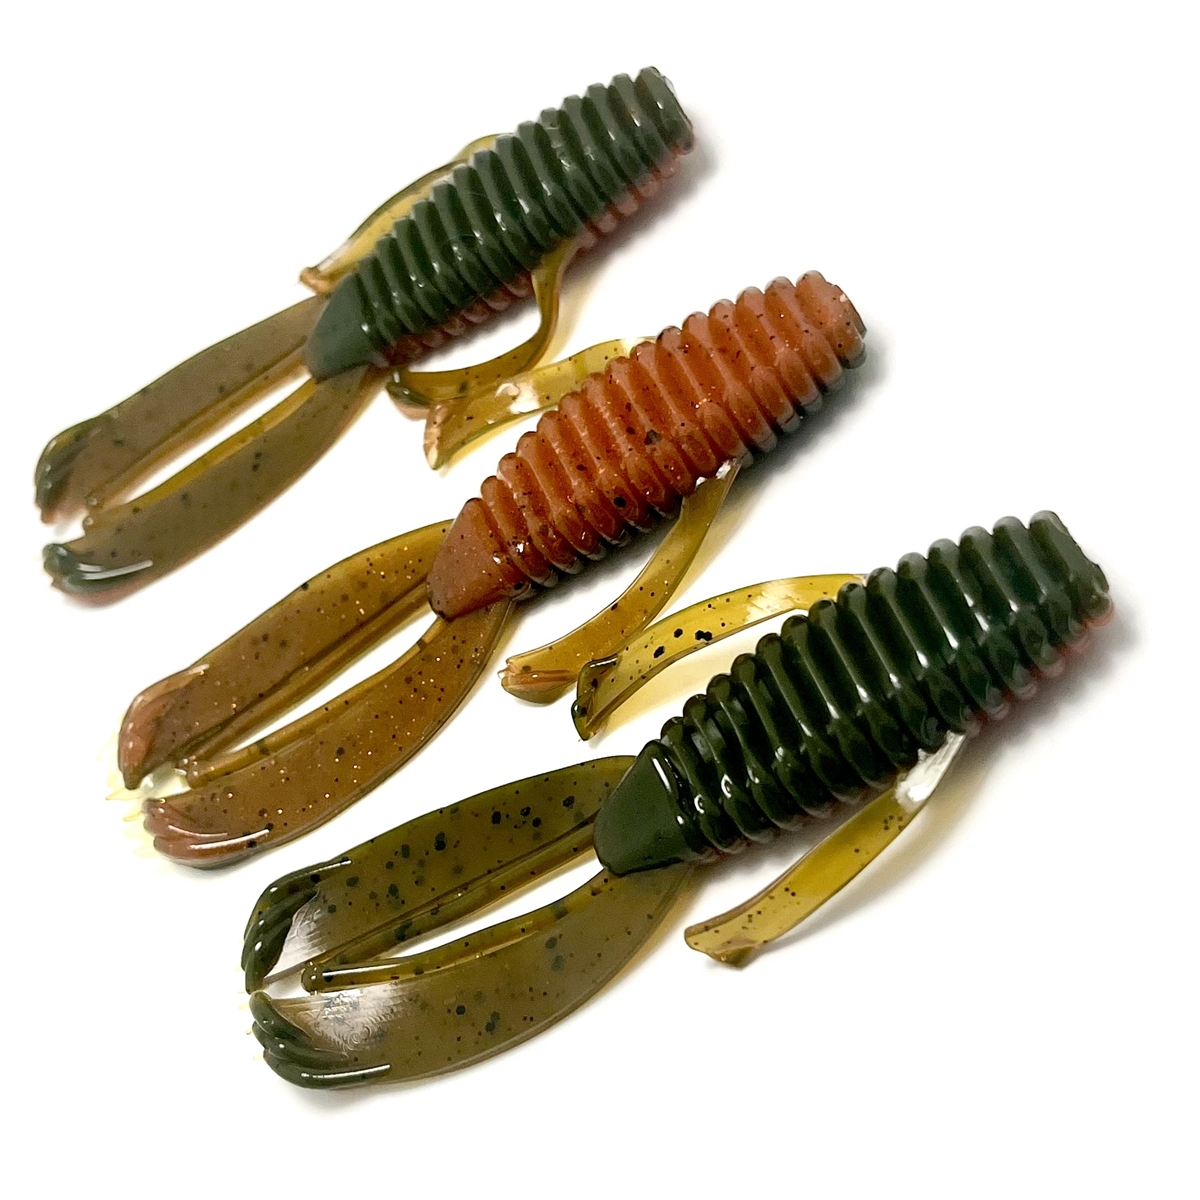 Ragin Cajun is a two toned bait which we take great pride in